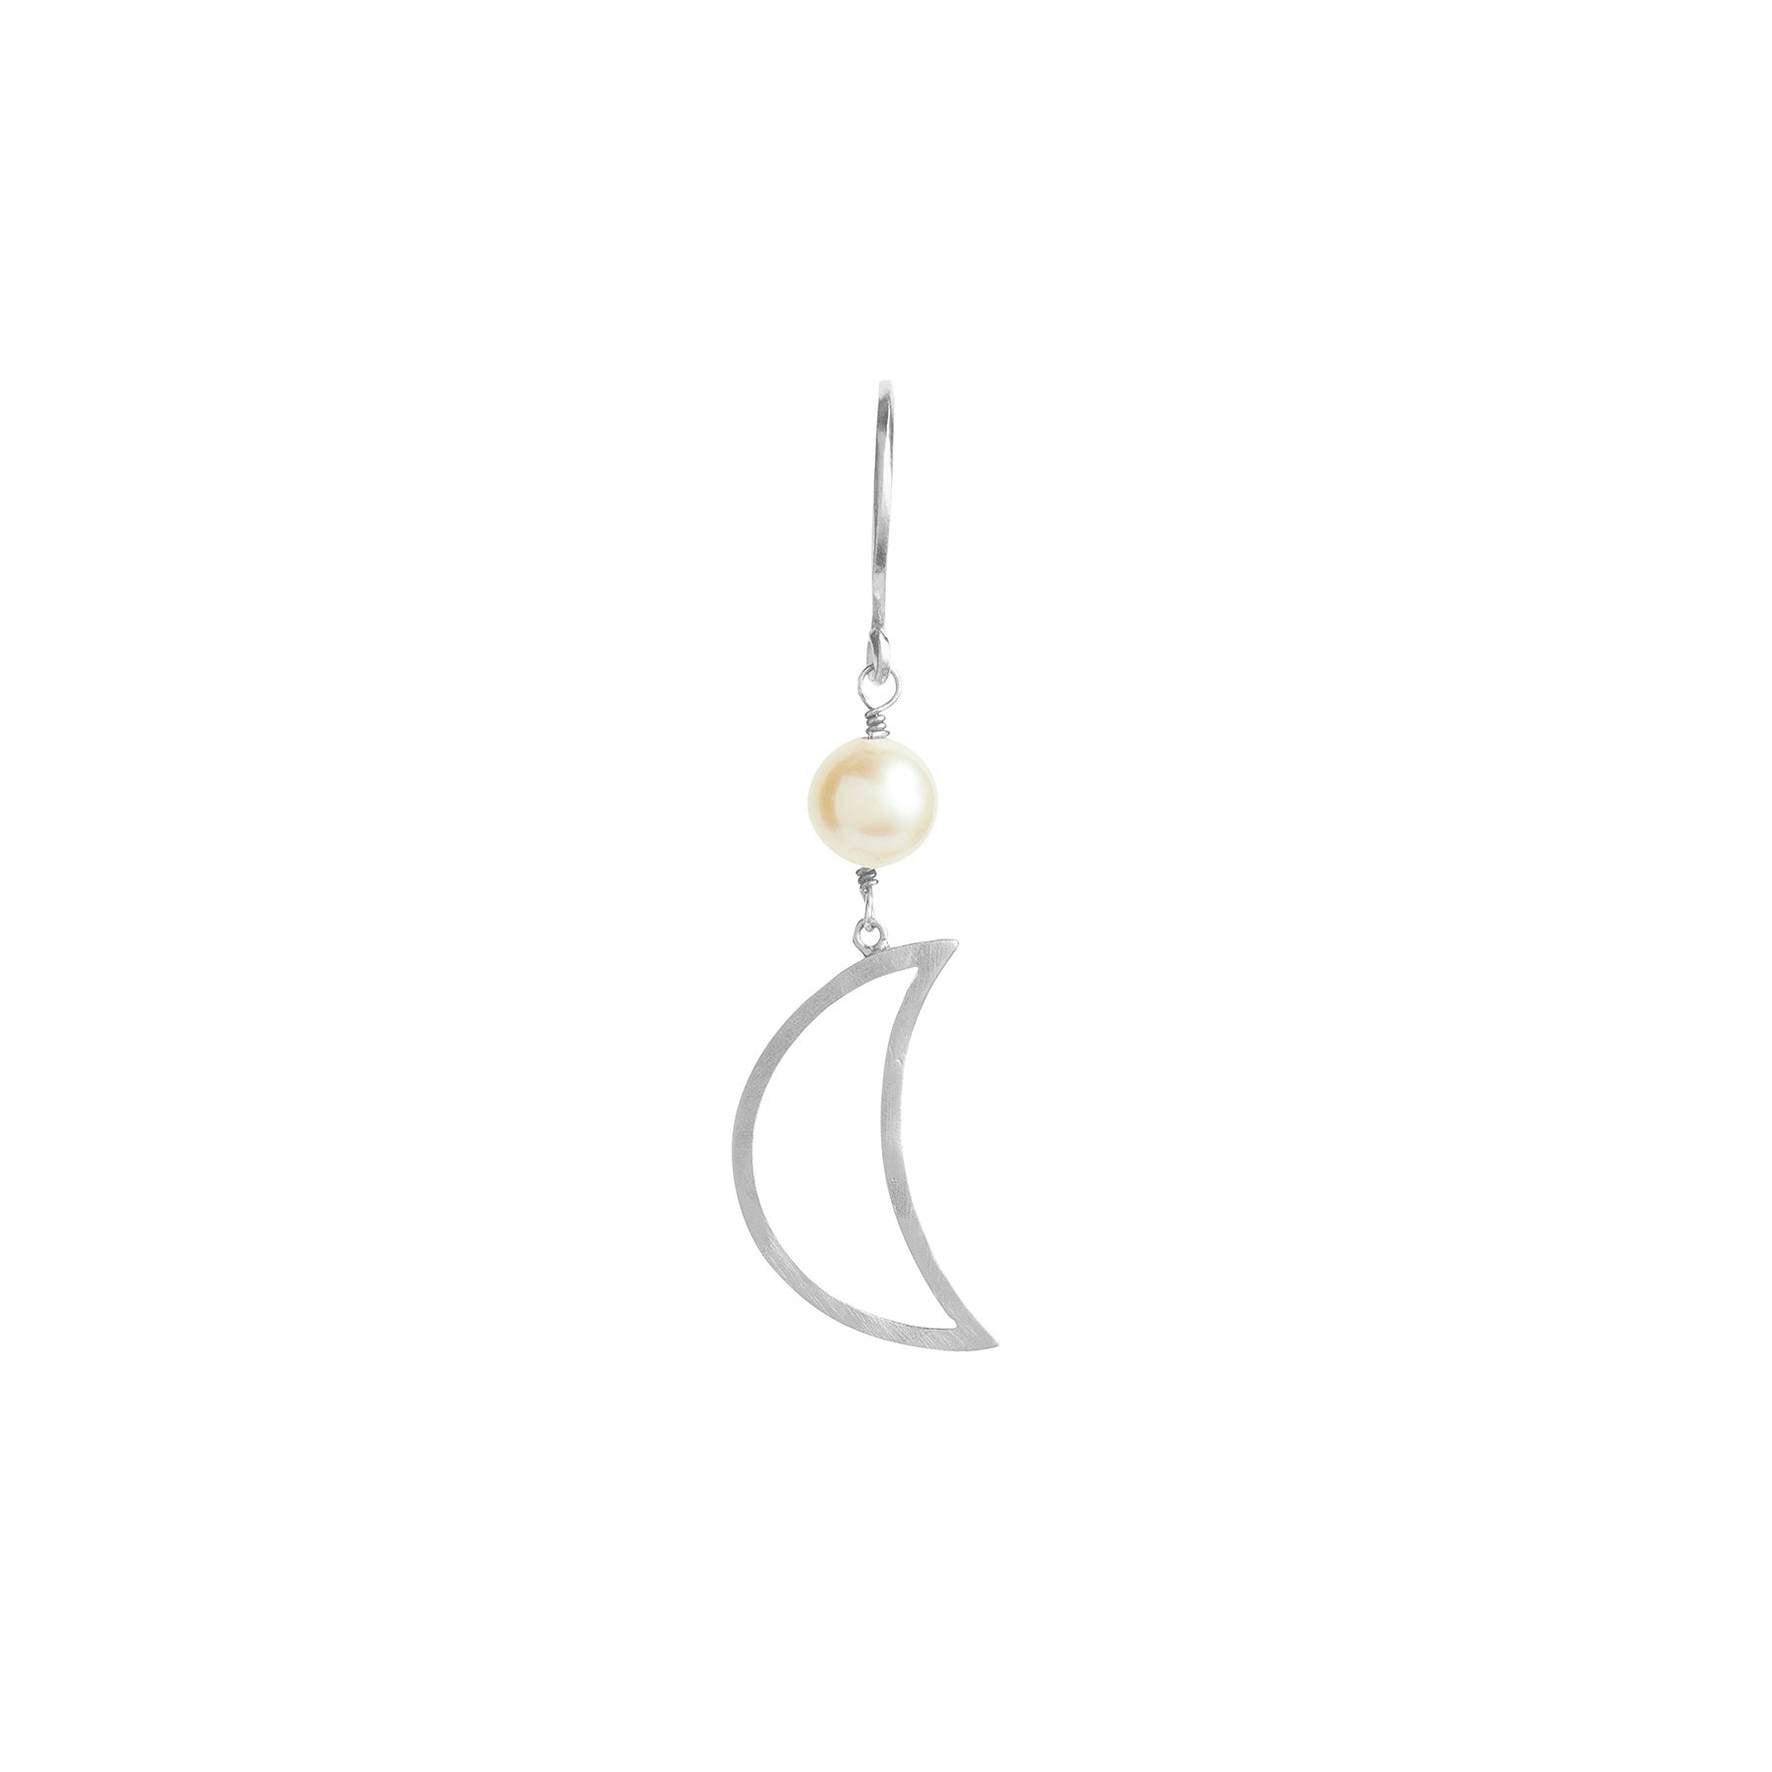 Bella Moon Earring With Pearl från STINE A Jewelry i Silver Sterling 925